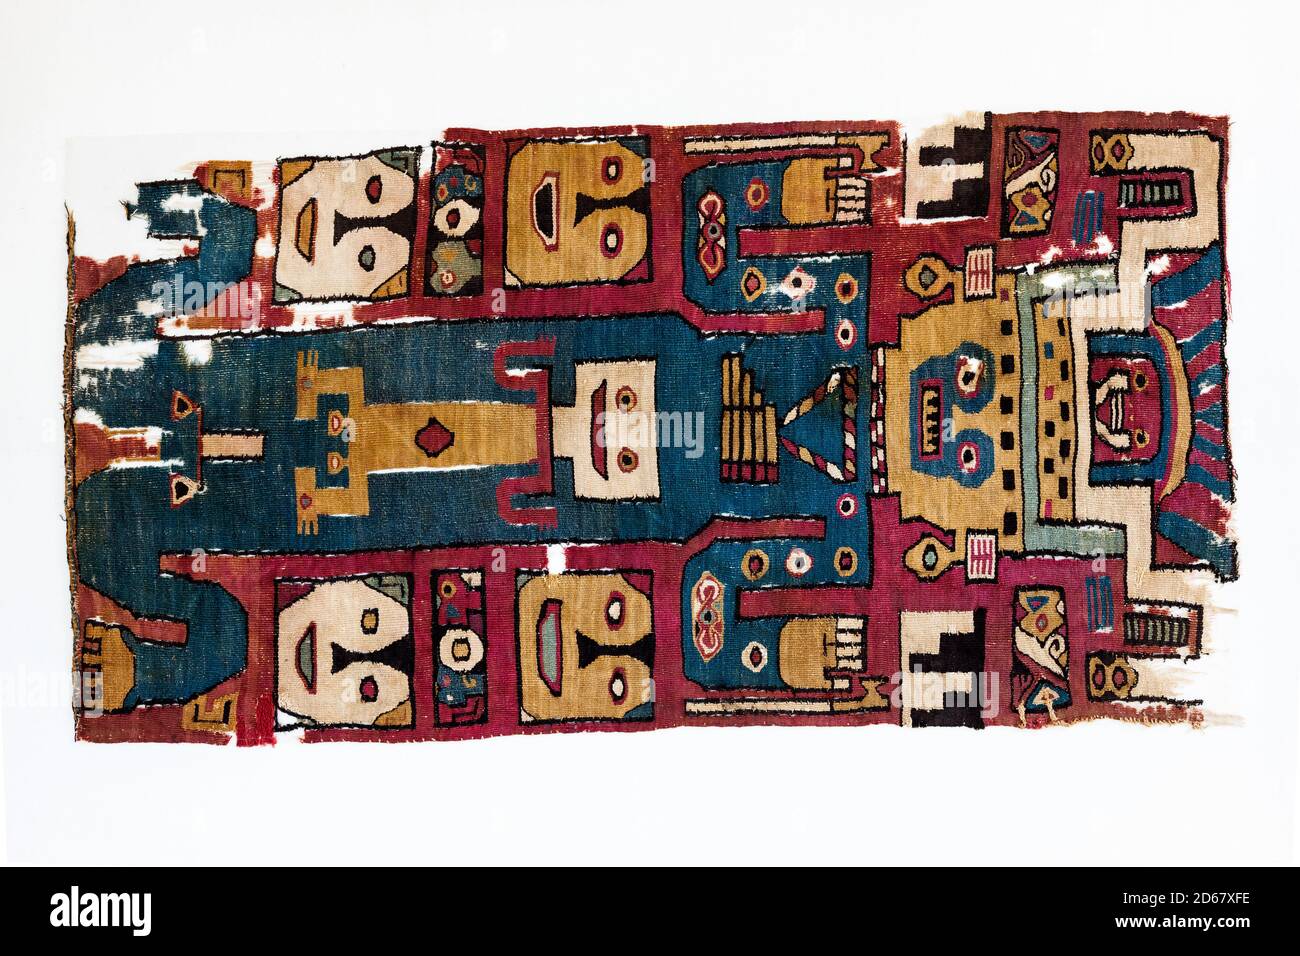 Mantle of Huari, Huari culture of museum warehouse, 'National Museum of Archaeology, Anthropology and History of Peru', Lima, Peru, South America Stock Photo